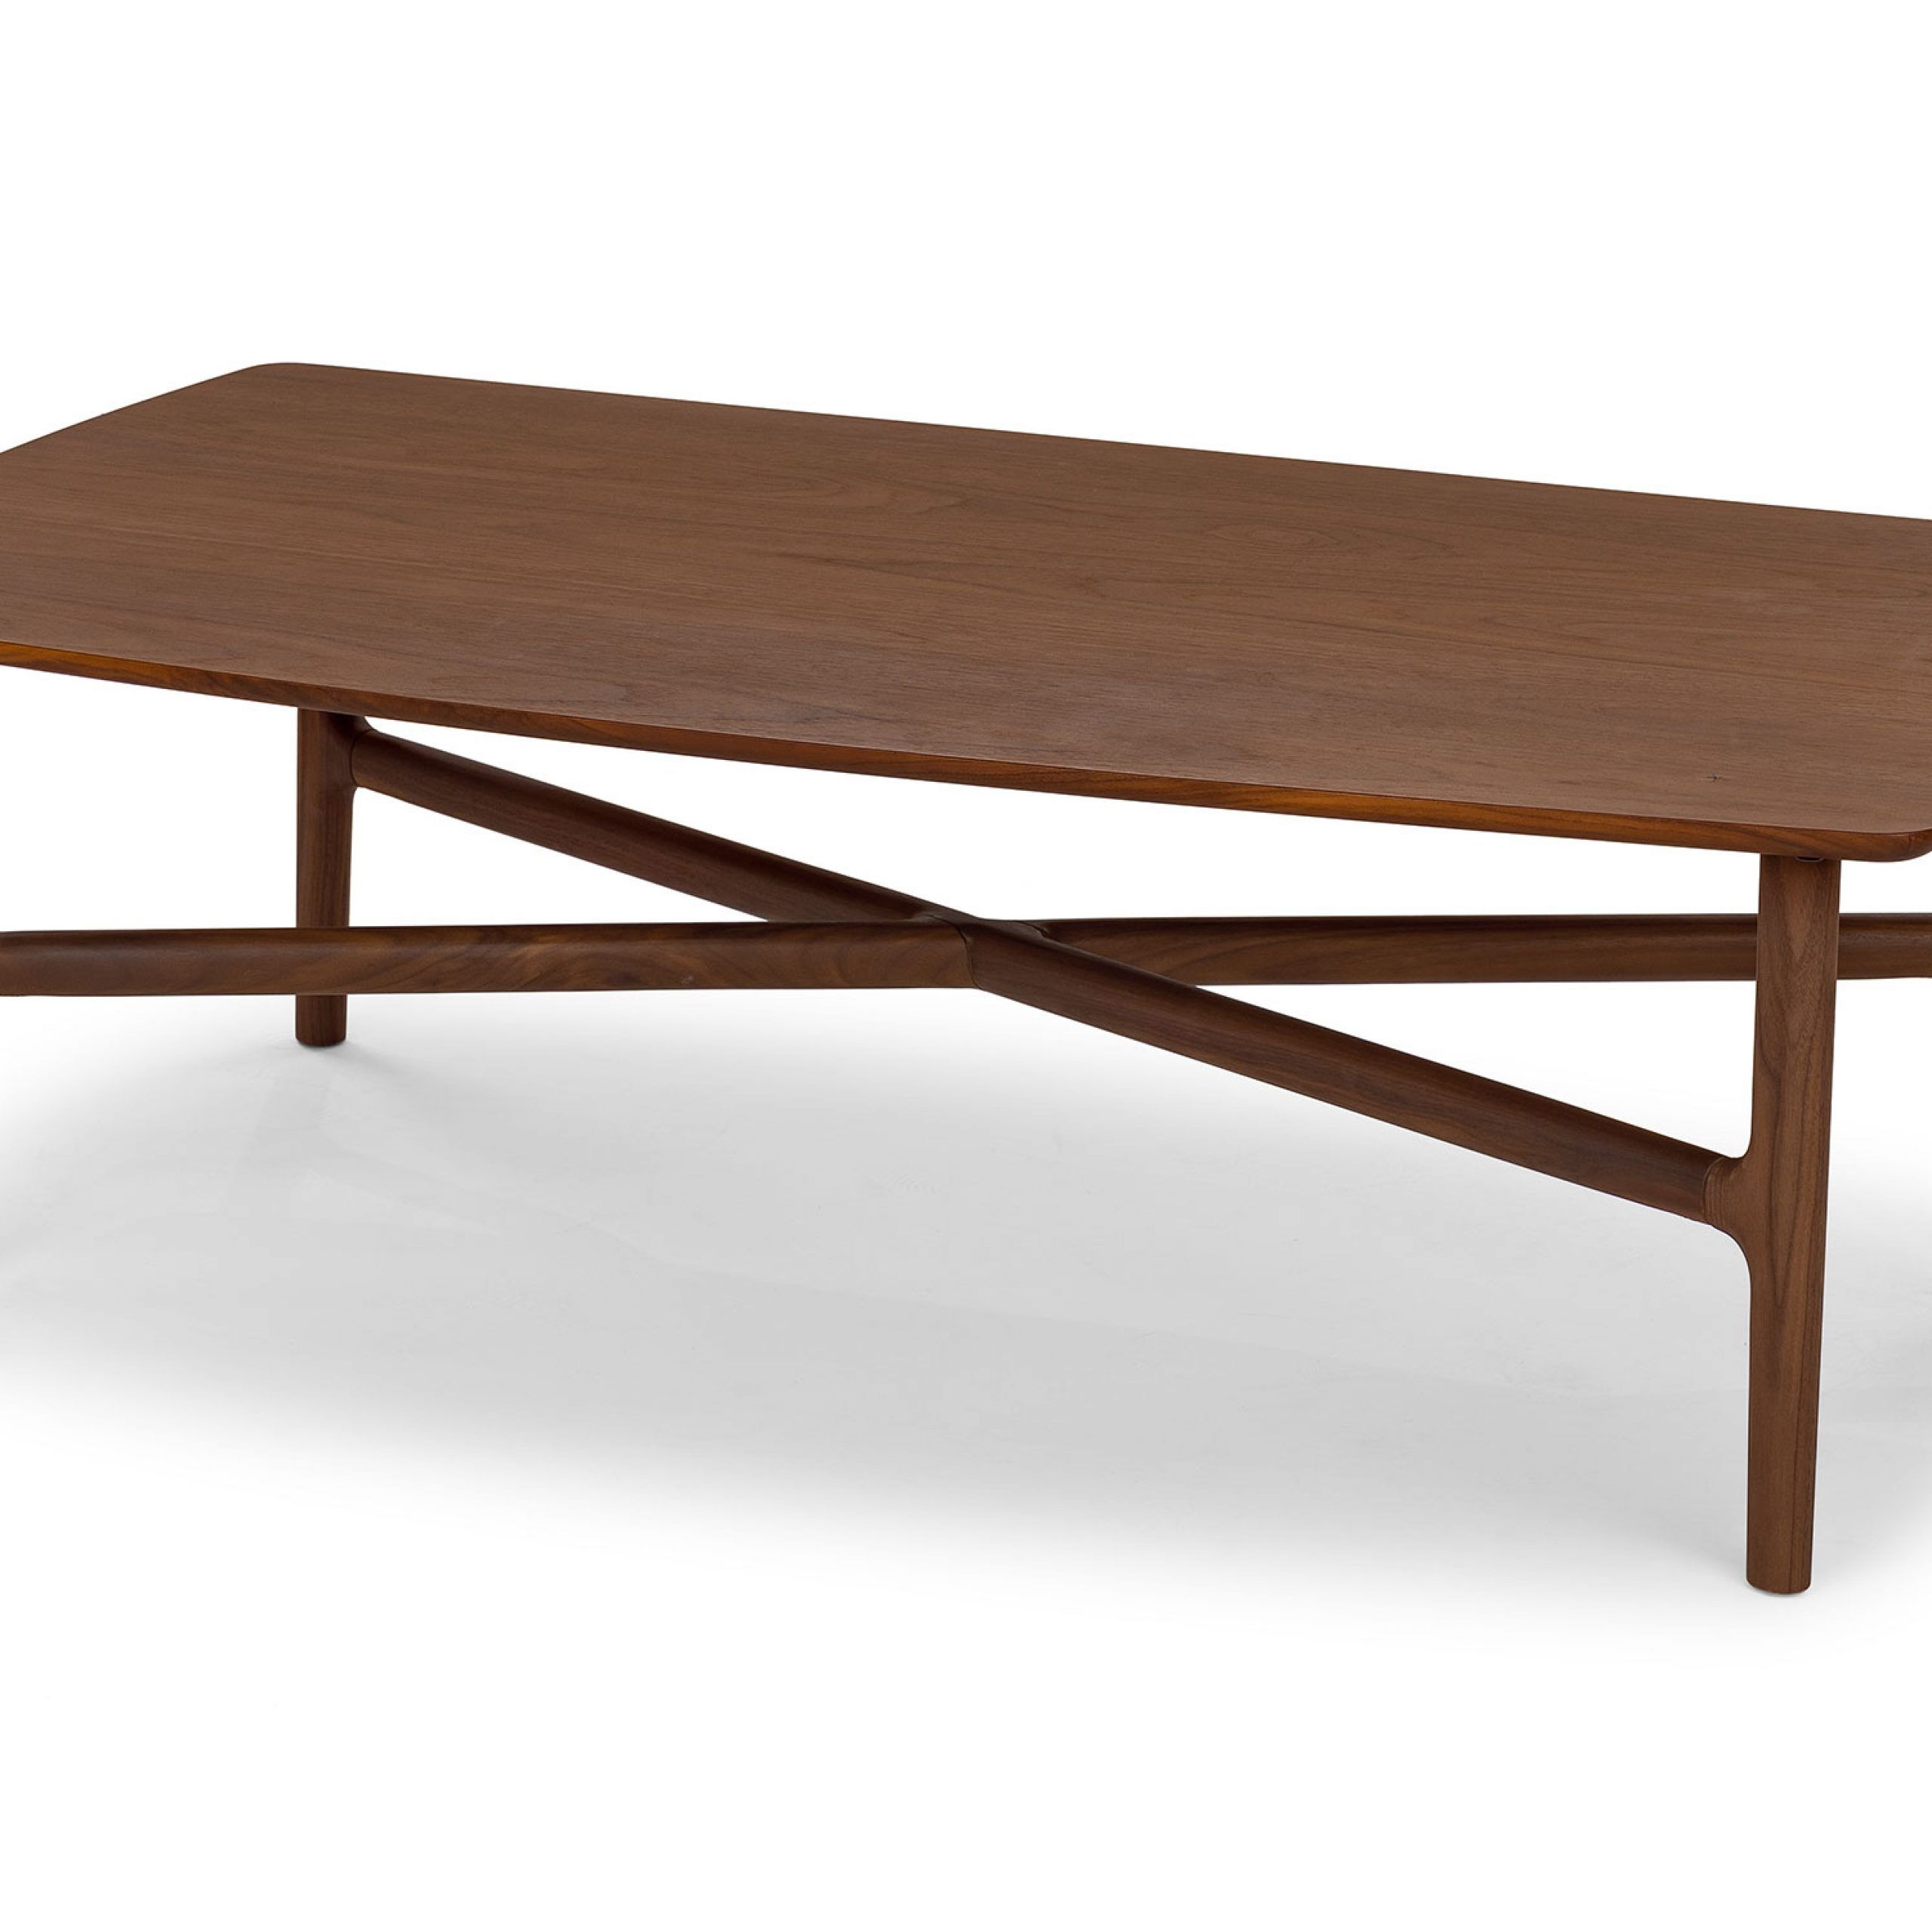 Article With Regard To Favorite Matte Coffee Tables (View 9 of 20)